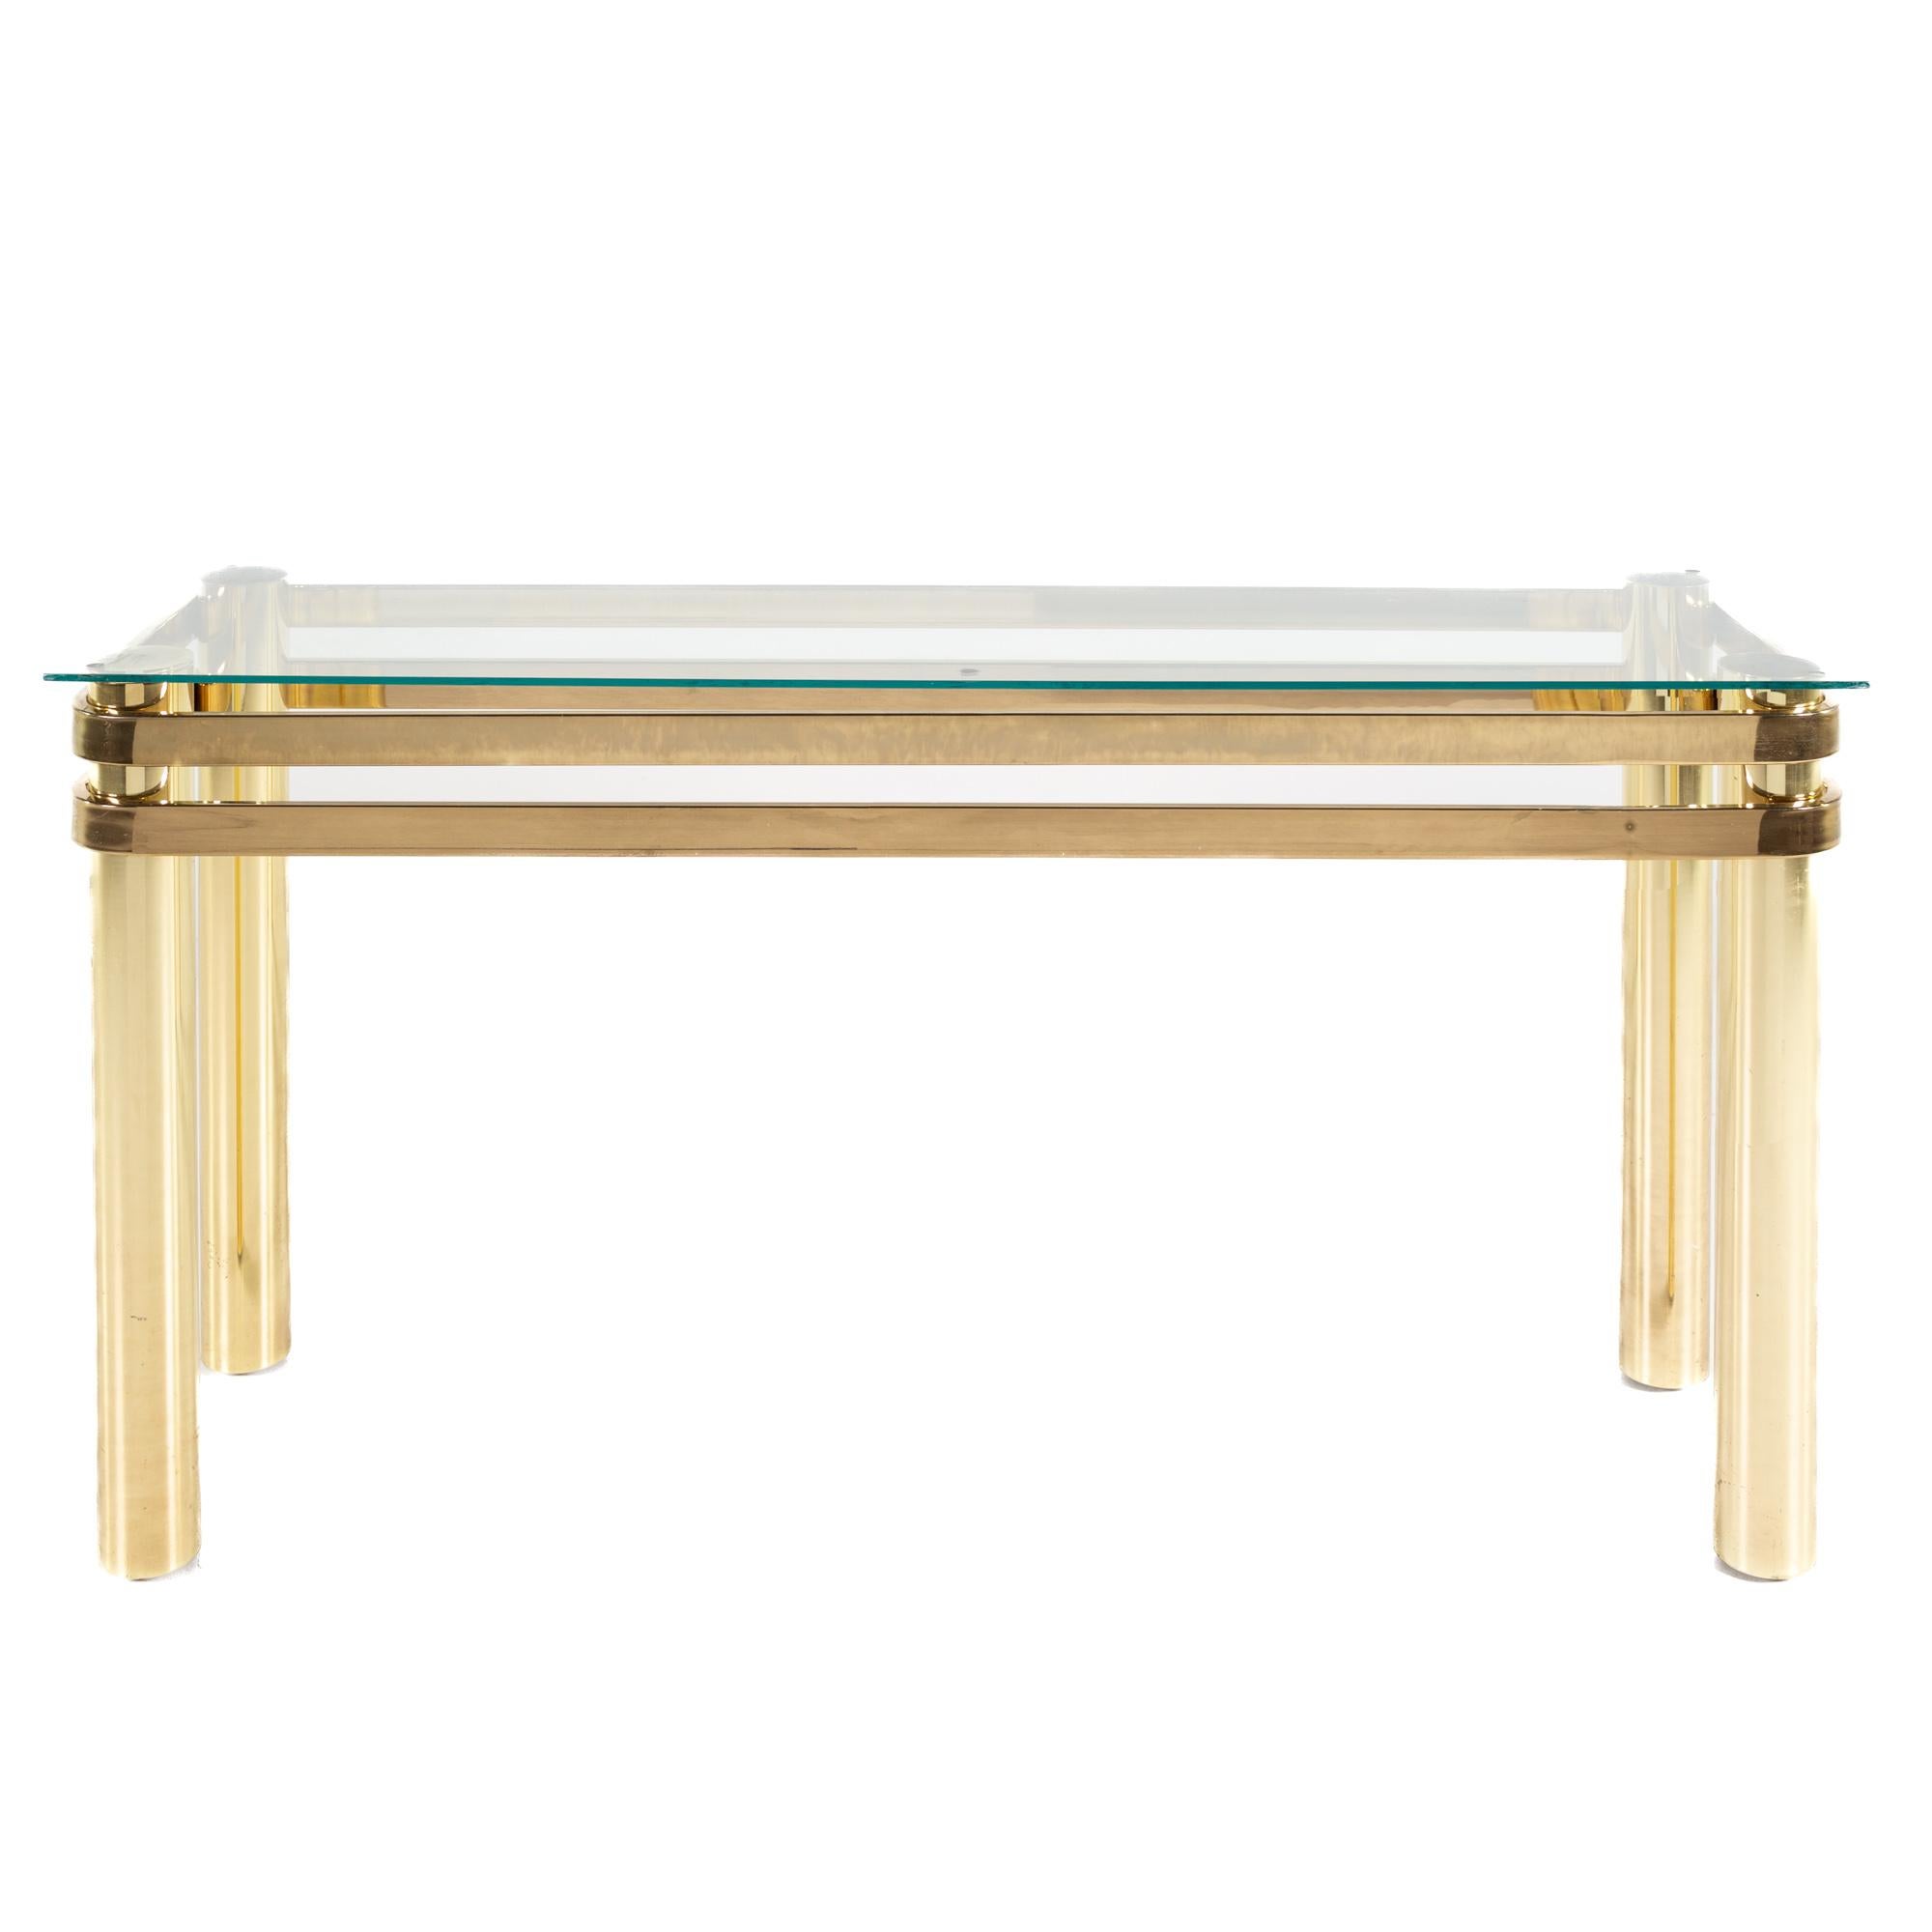 Milo Baughman Style Mid Century Brass Sofa Table

This table measures: 52 wide x 16 deep x 26.5 inches high

All pieces of furniture can be had in what we call restored vintage condition. That means the piece is restored upon purchase so it’s free